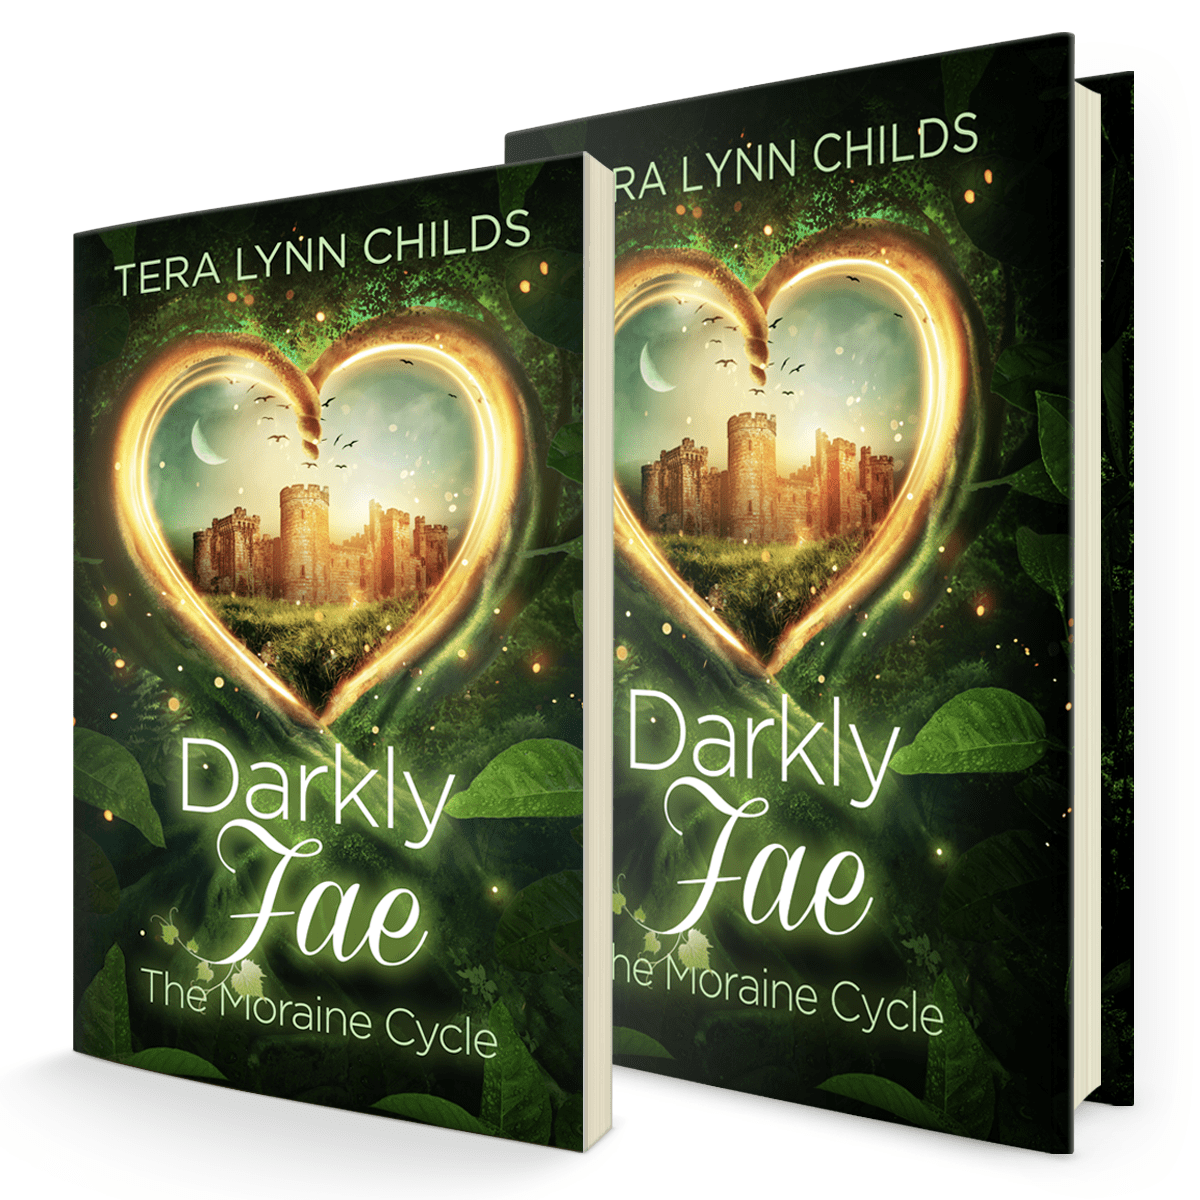 Darkly Fae: The Moraine Cycle by Tera Lynn Childs, coming December 6, 2016 in ebook, paperback, and hardcover.